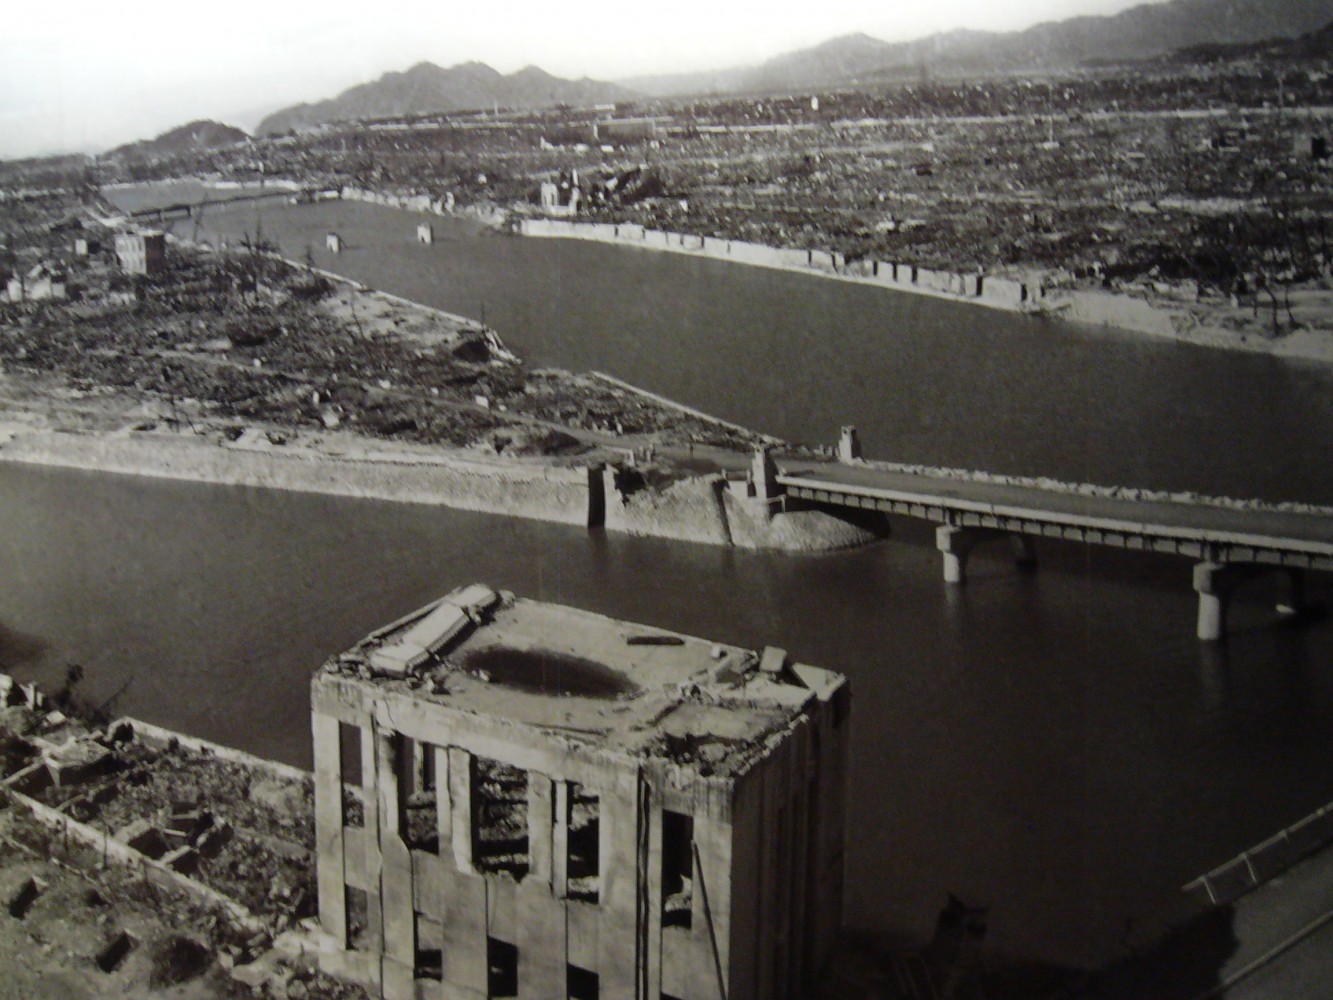 View from air after the bomb was dropped